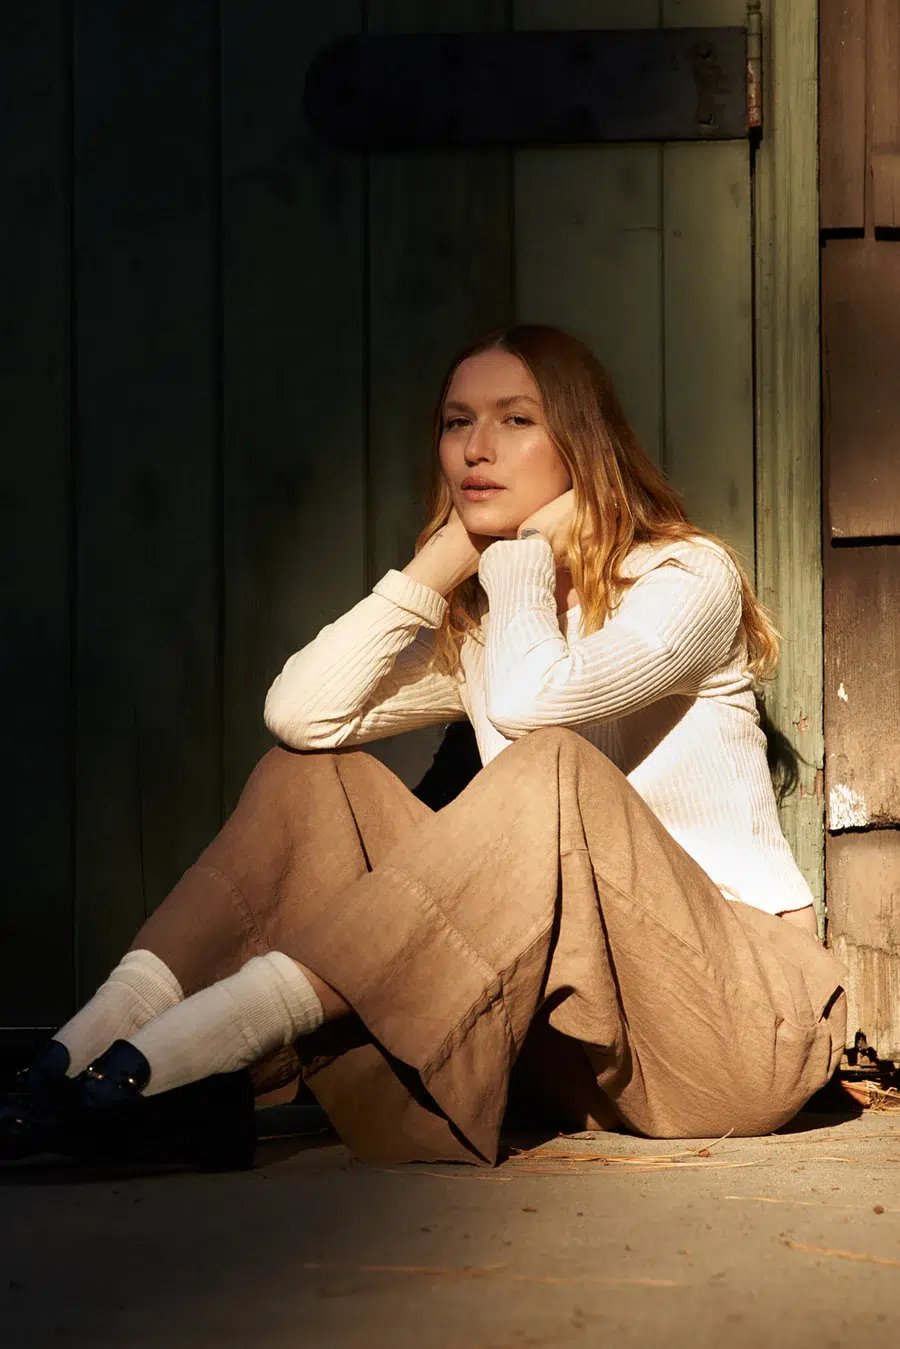 A woman sitting on the ground, leaning against a wall, bathed in sunlight.